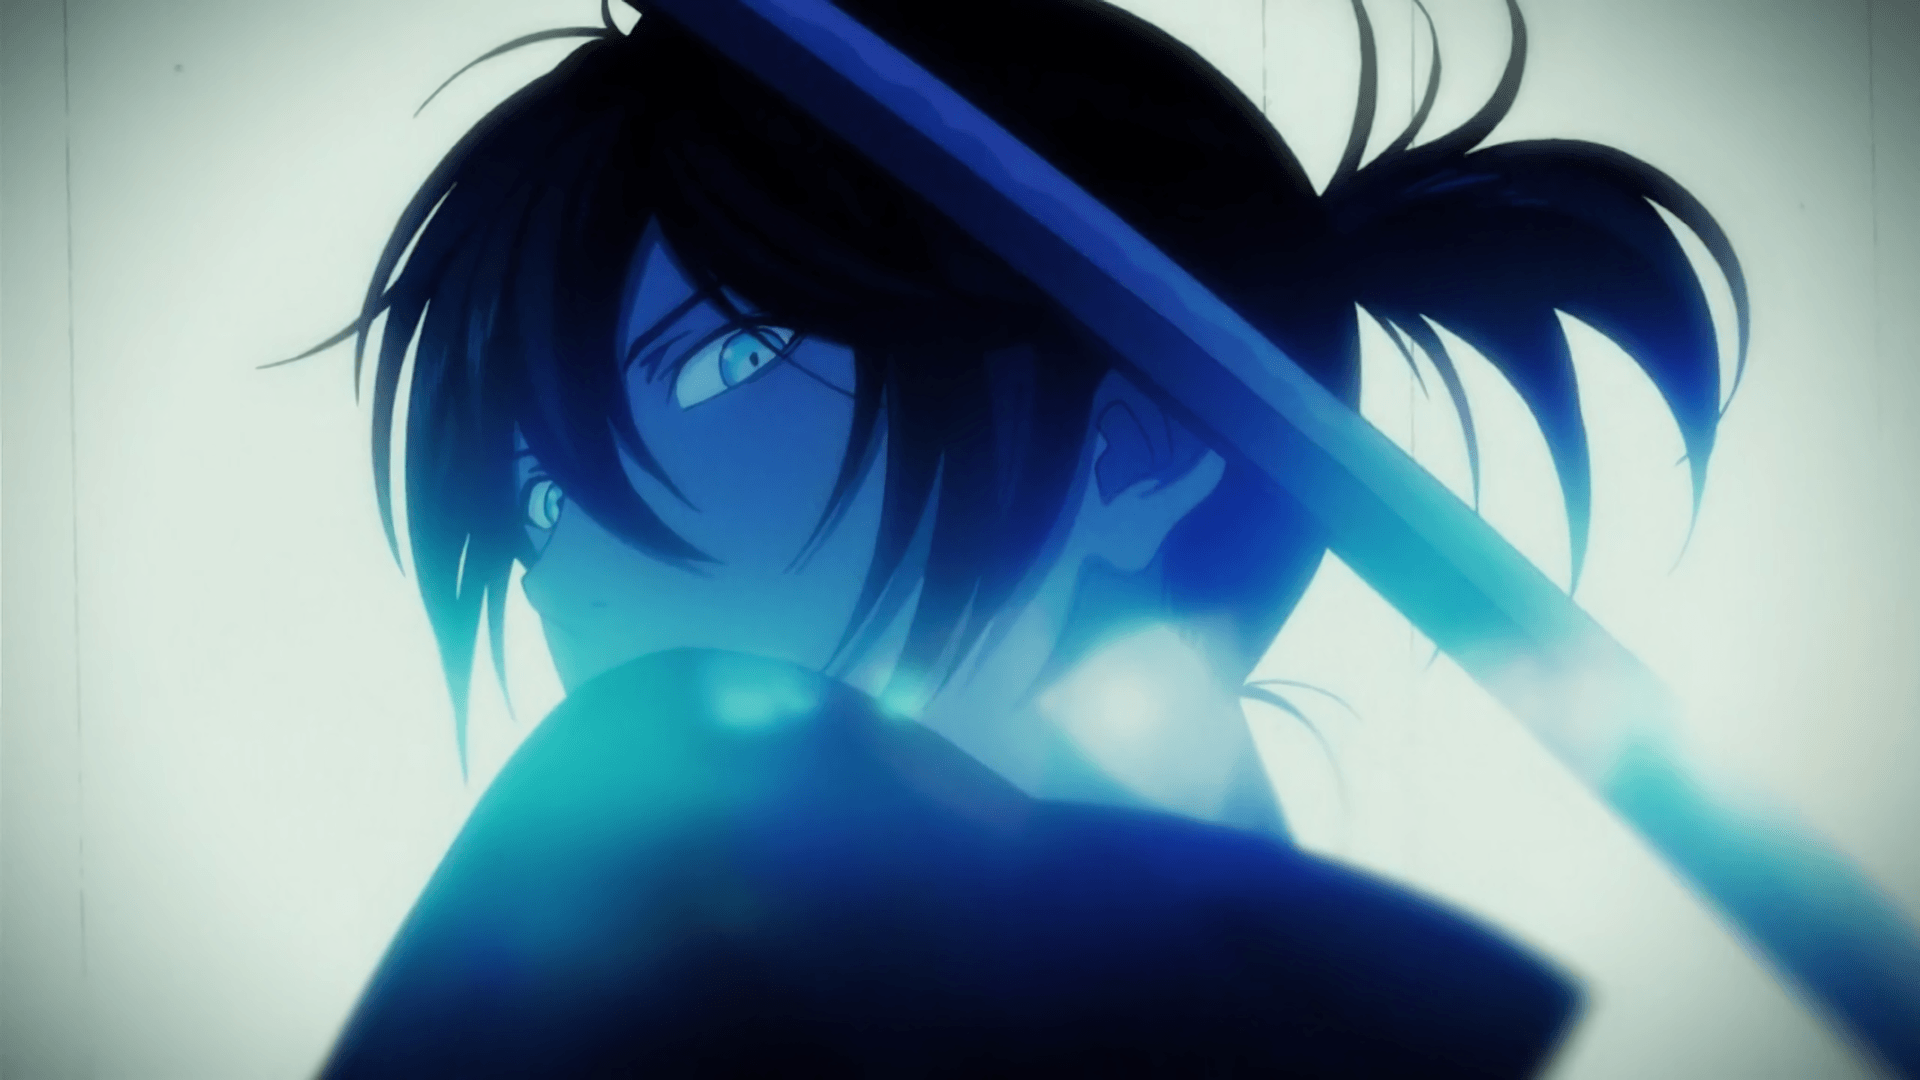 2. "Yato" from Noragami - wide 9